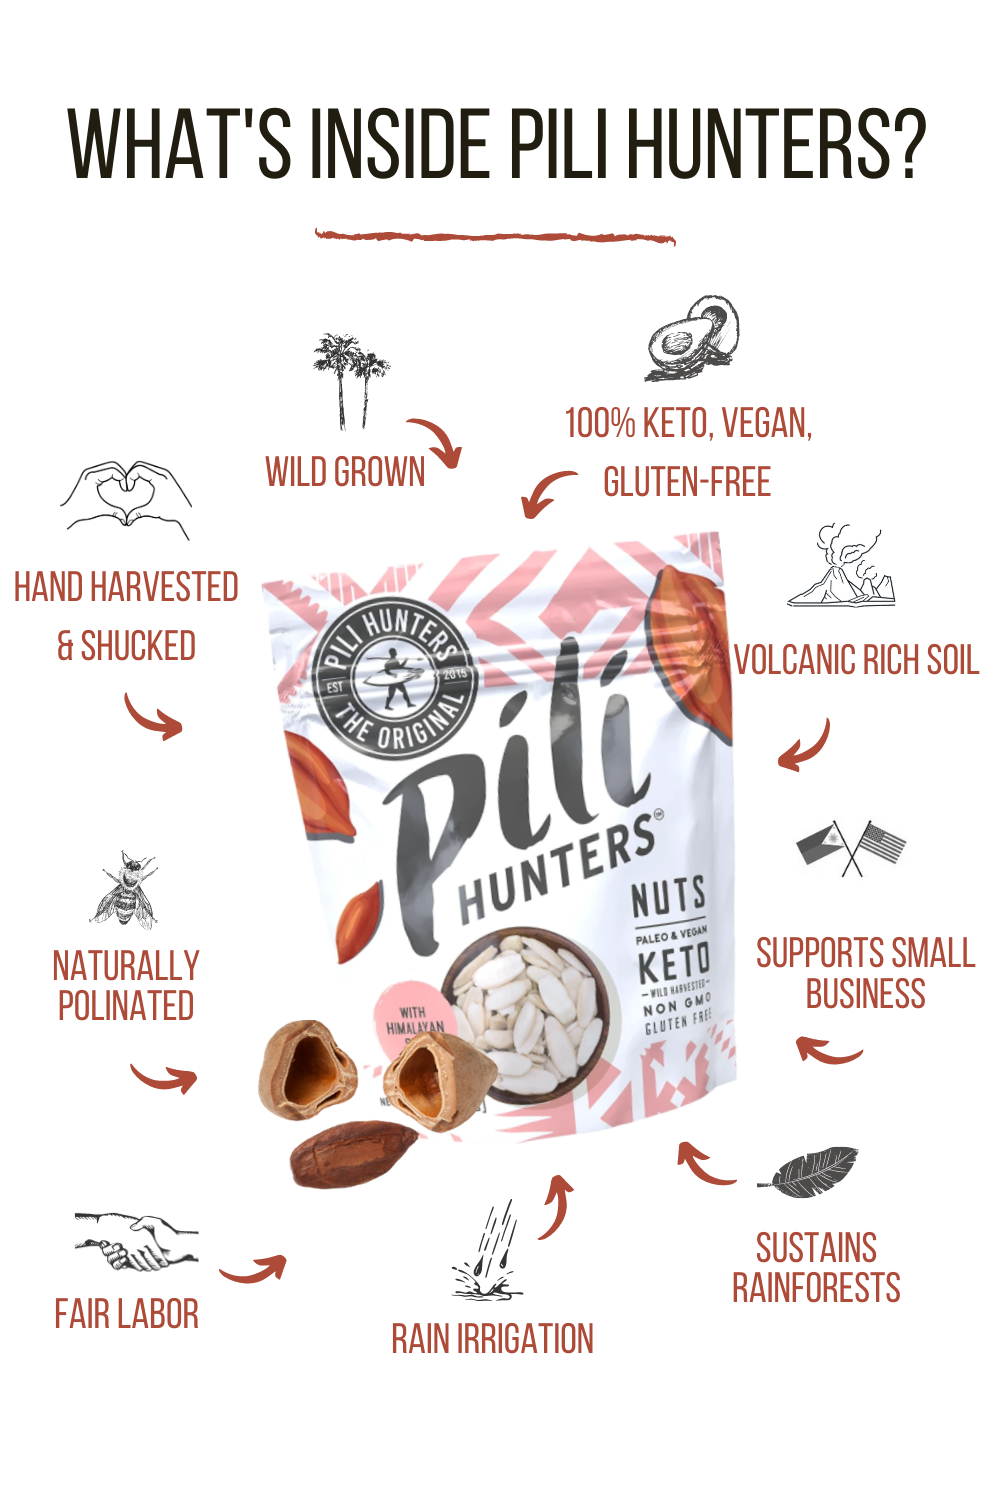 Pili Hunters™ Sprouted Pili Nuts with PINK Himalayan Salt